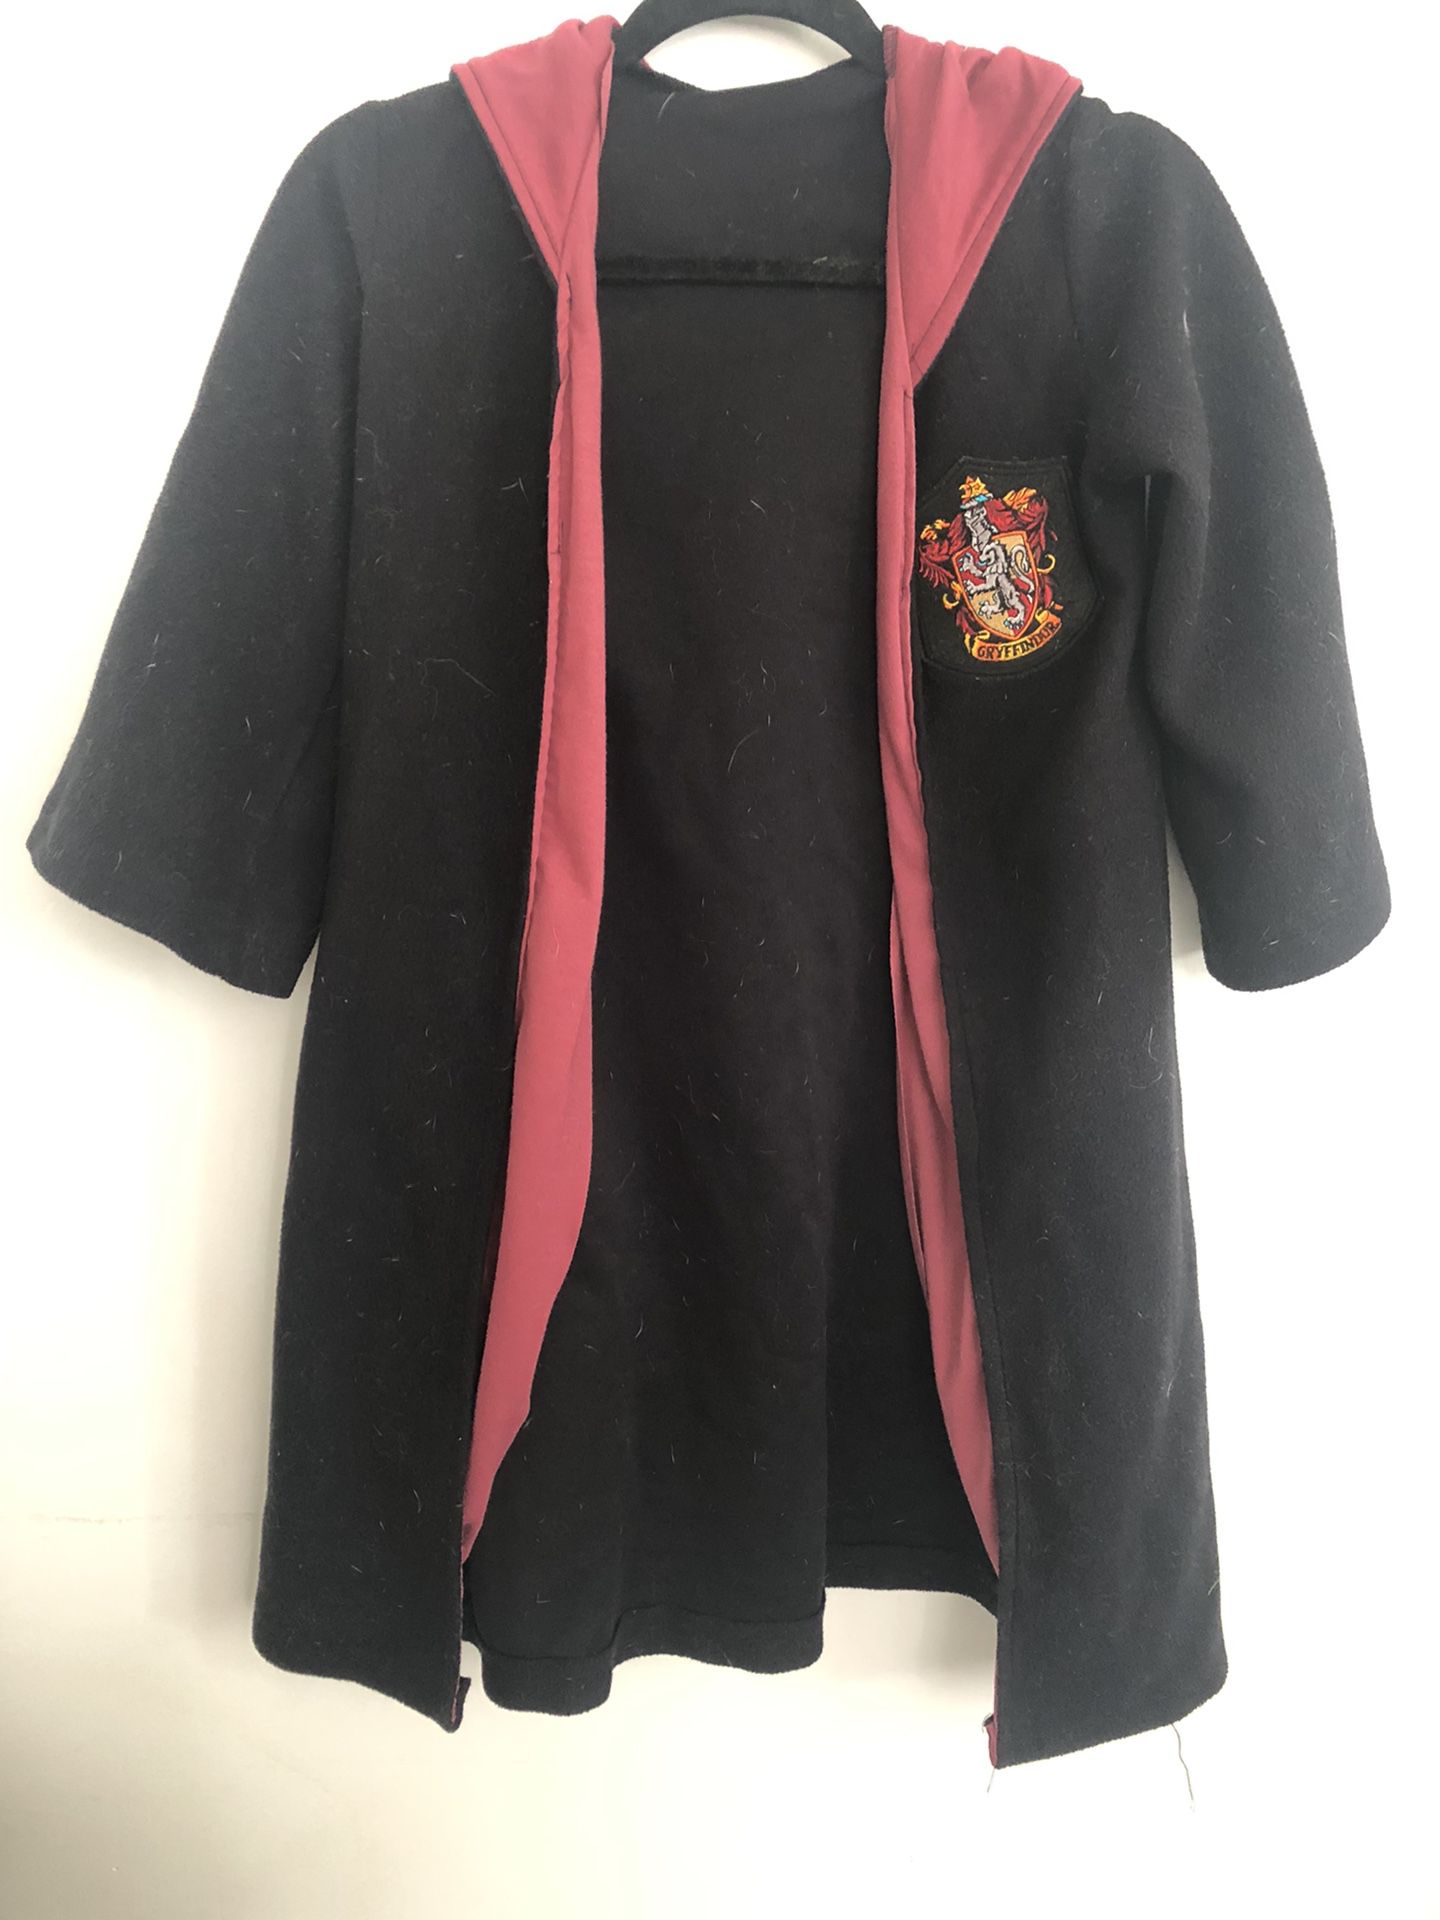 Awesome harry Potter Hogwarts robe from Rubys size small boy or a girl